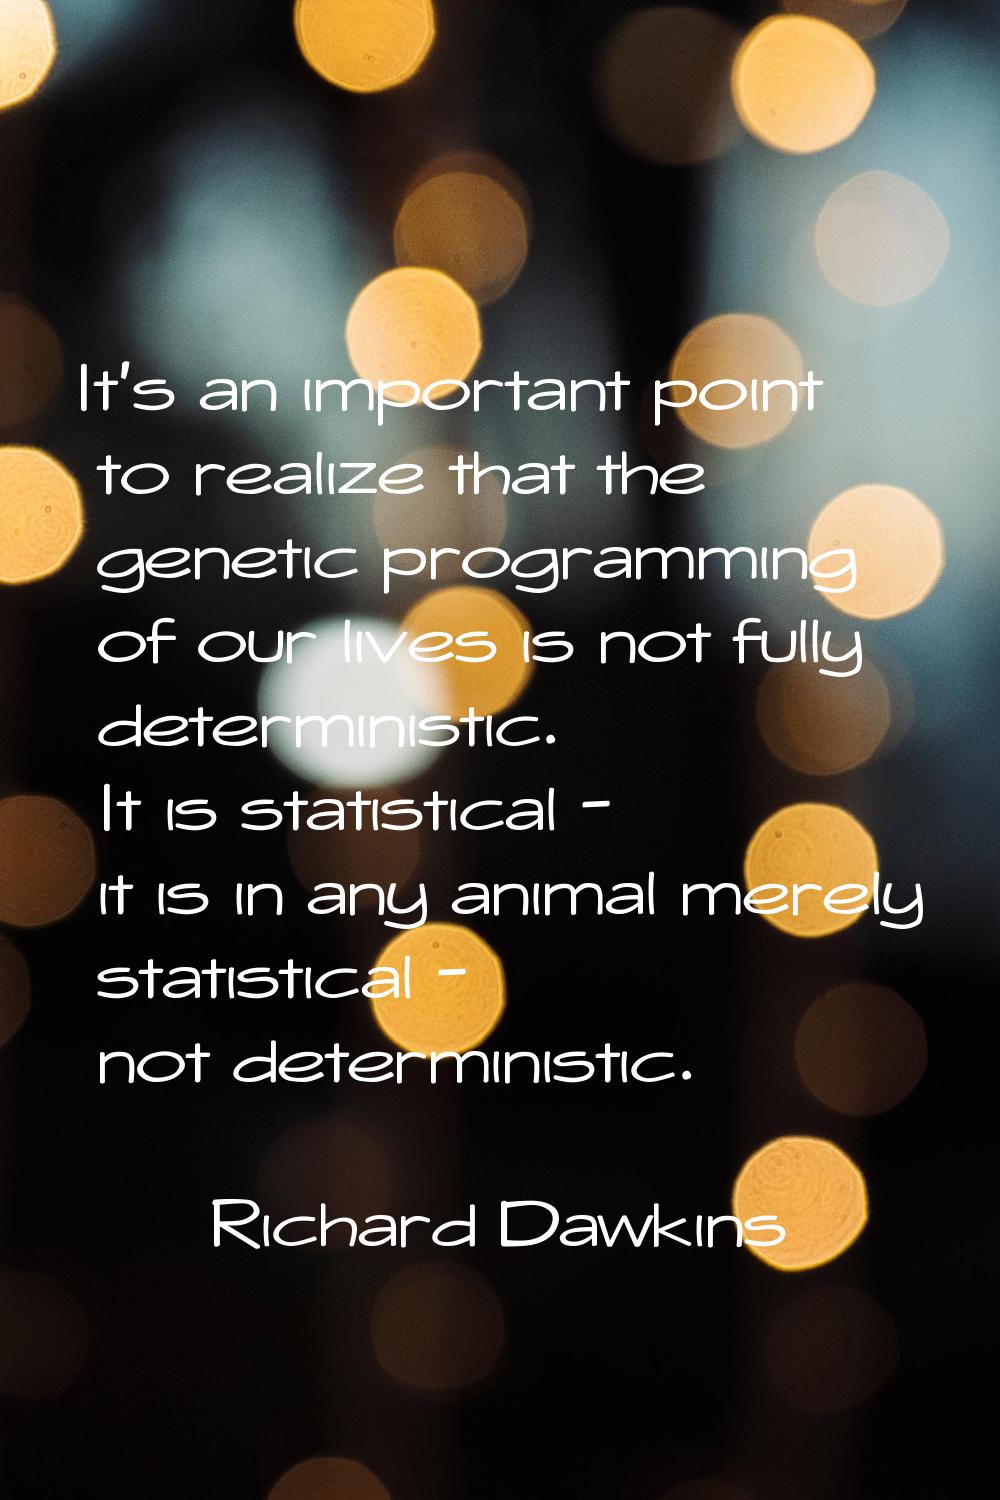 It's an important point to realize that the genetic programming of our lives is not fully determini